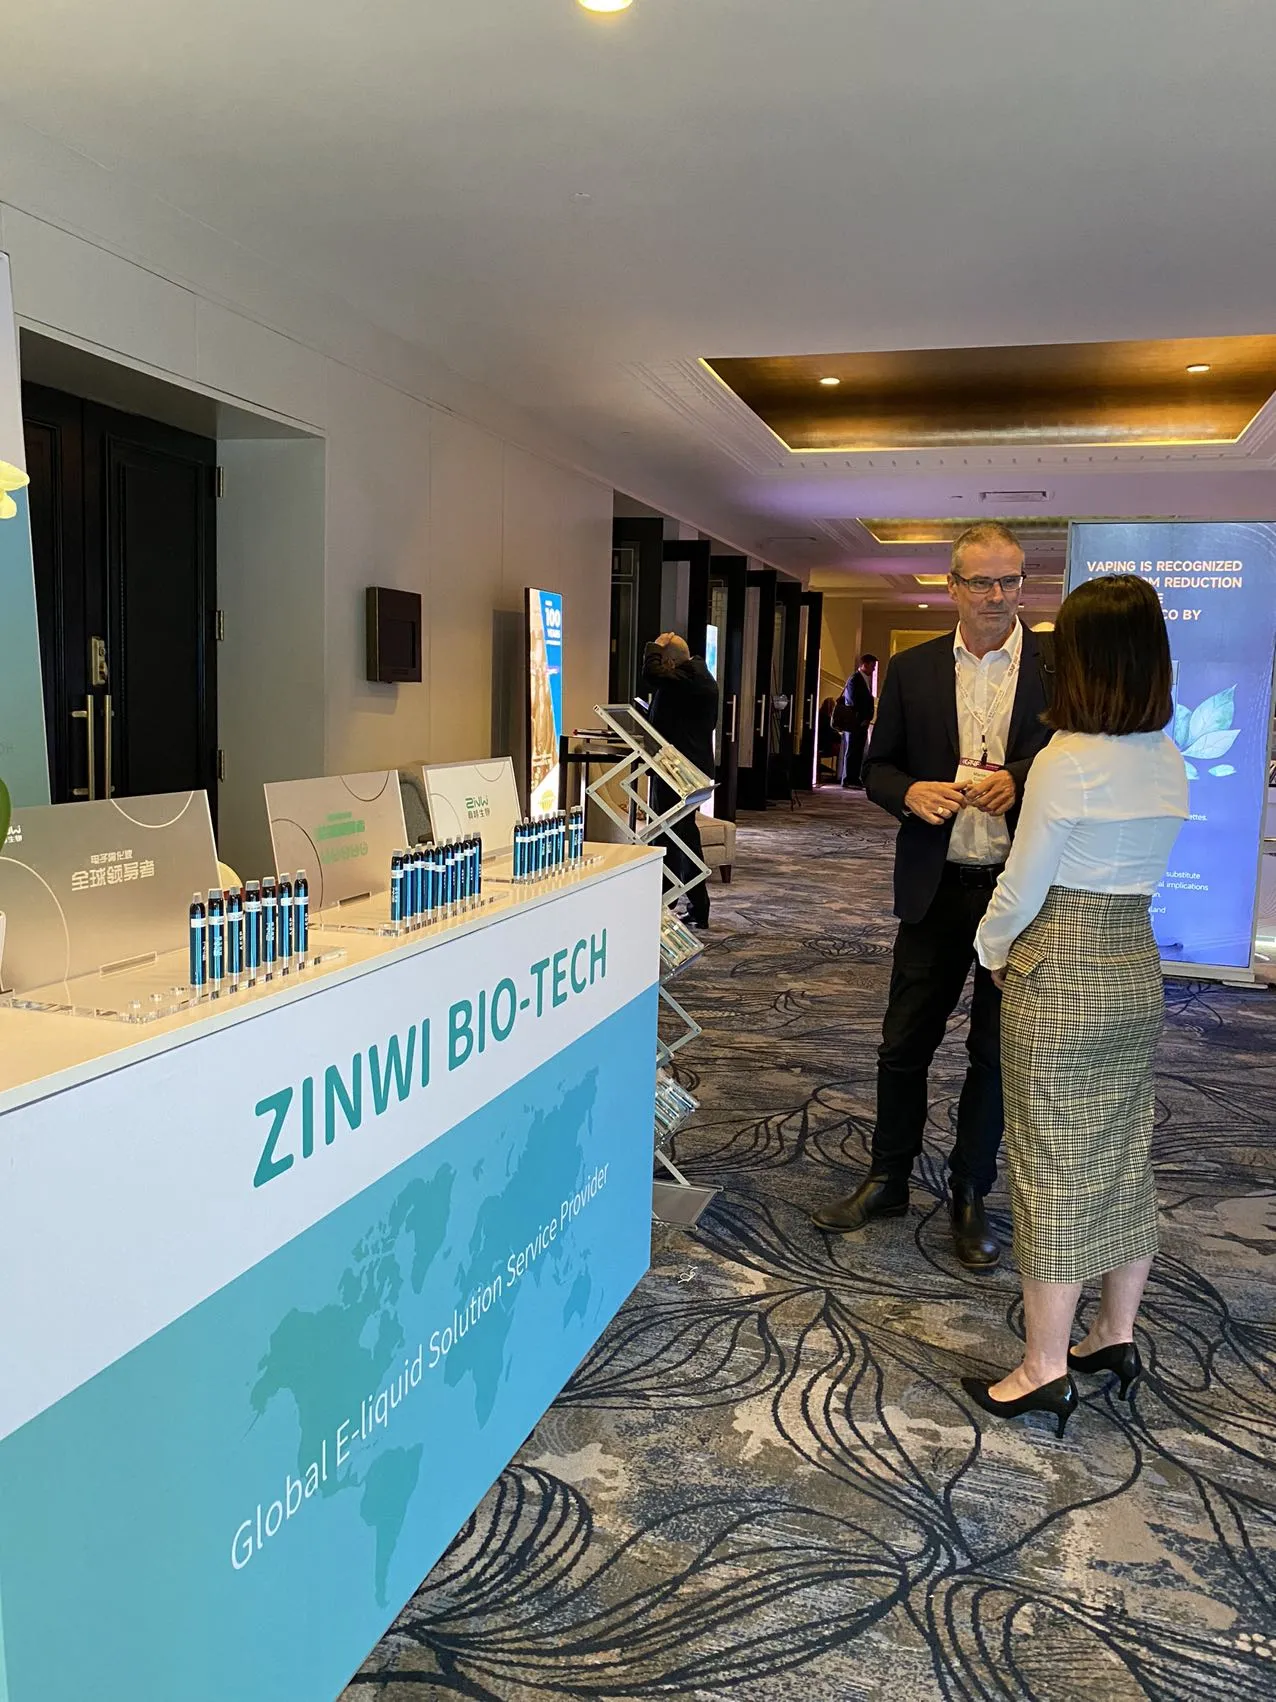 In the future, Zinwi is committed to making achievements in the areas of "next-generation nicotine salts," "low-temperature atomization," and "the compatibility of smoking devices and e-liquids" to promote the development of the industry.